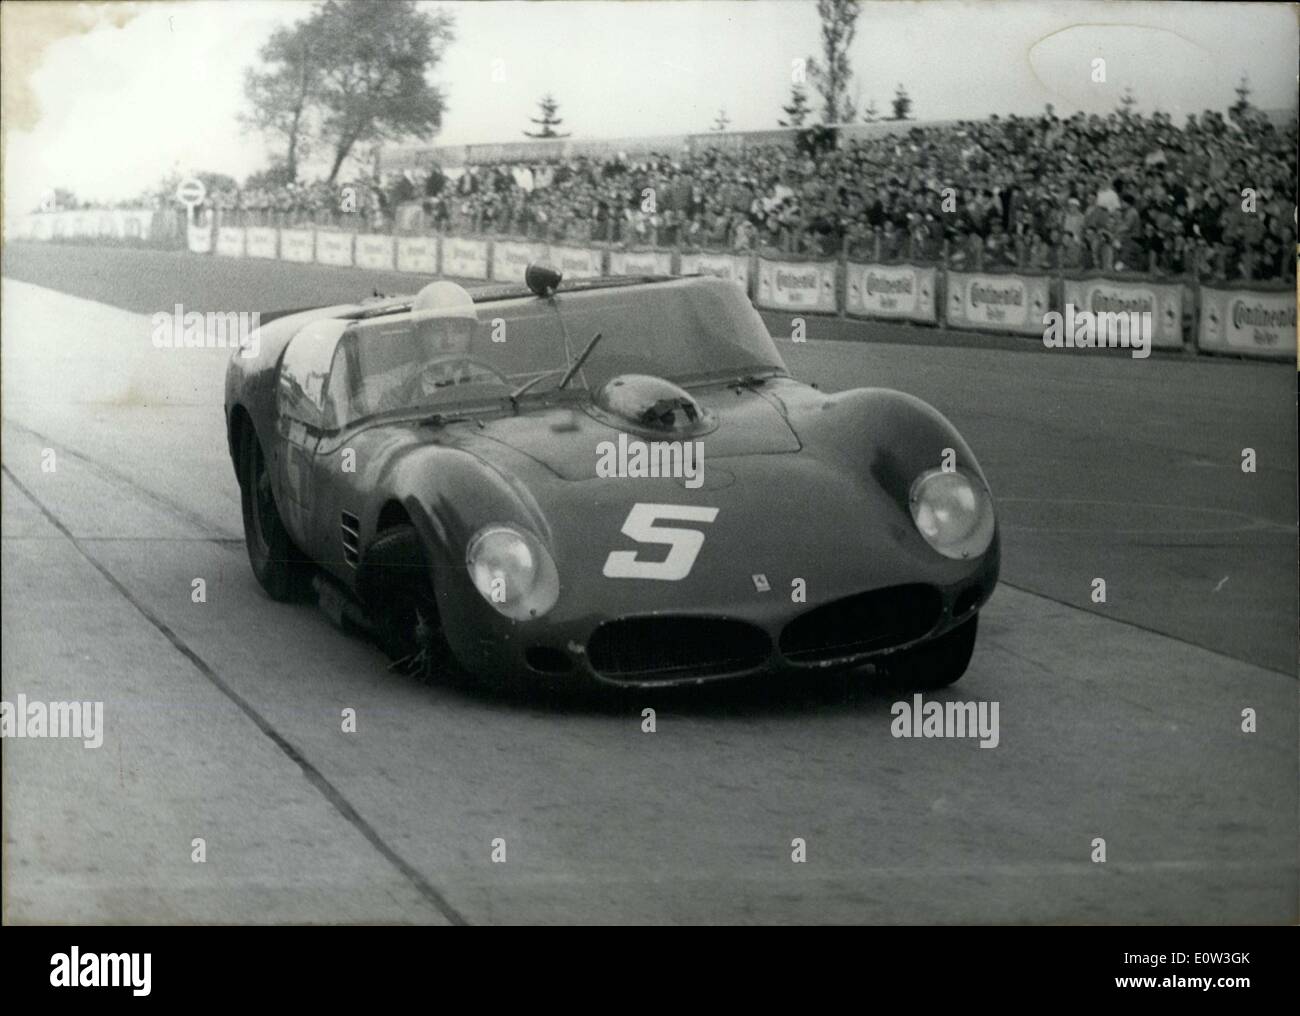 May 28, 1961 - Masten Gregory won the 7th International ADAC 1,000km Race in Nuerburgring in Germany on May 28, 1951. Pictured here is the Ferrari of the Rodriguez Brothers, which ended up with a flat tire during a section of the race. Stock Photo